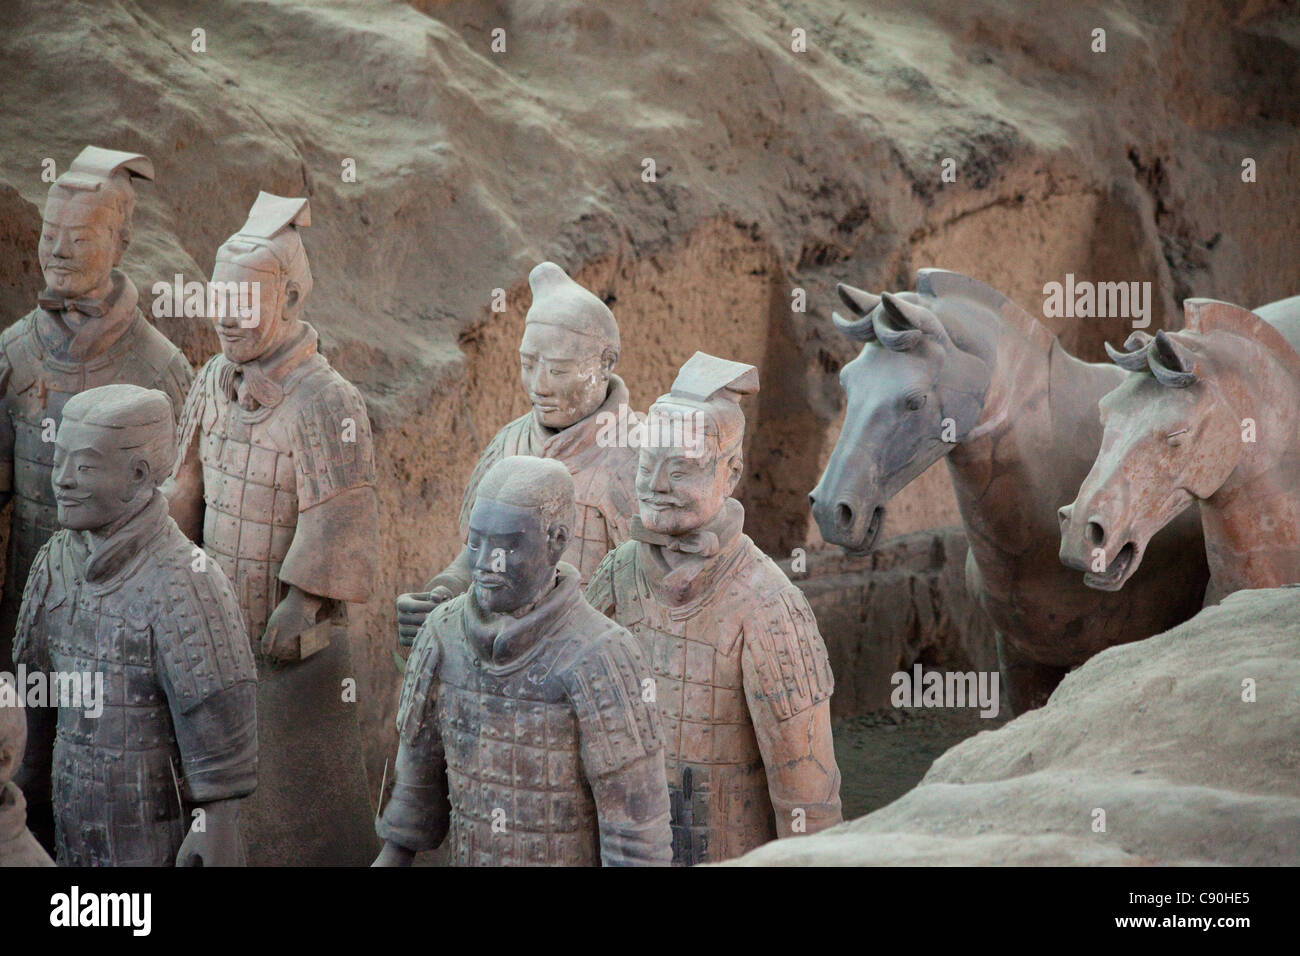 Soldiers of The Terracotta Army of the First Emperor of China near the mausoleum of Shi Huangdi near Xi'an Shaanxi Province Peop Stock Photo